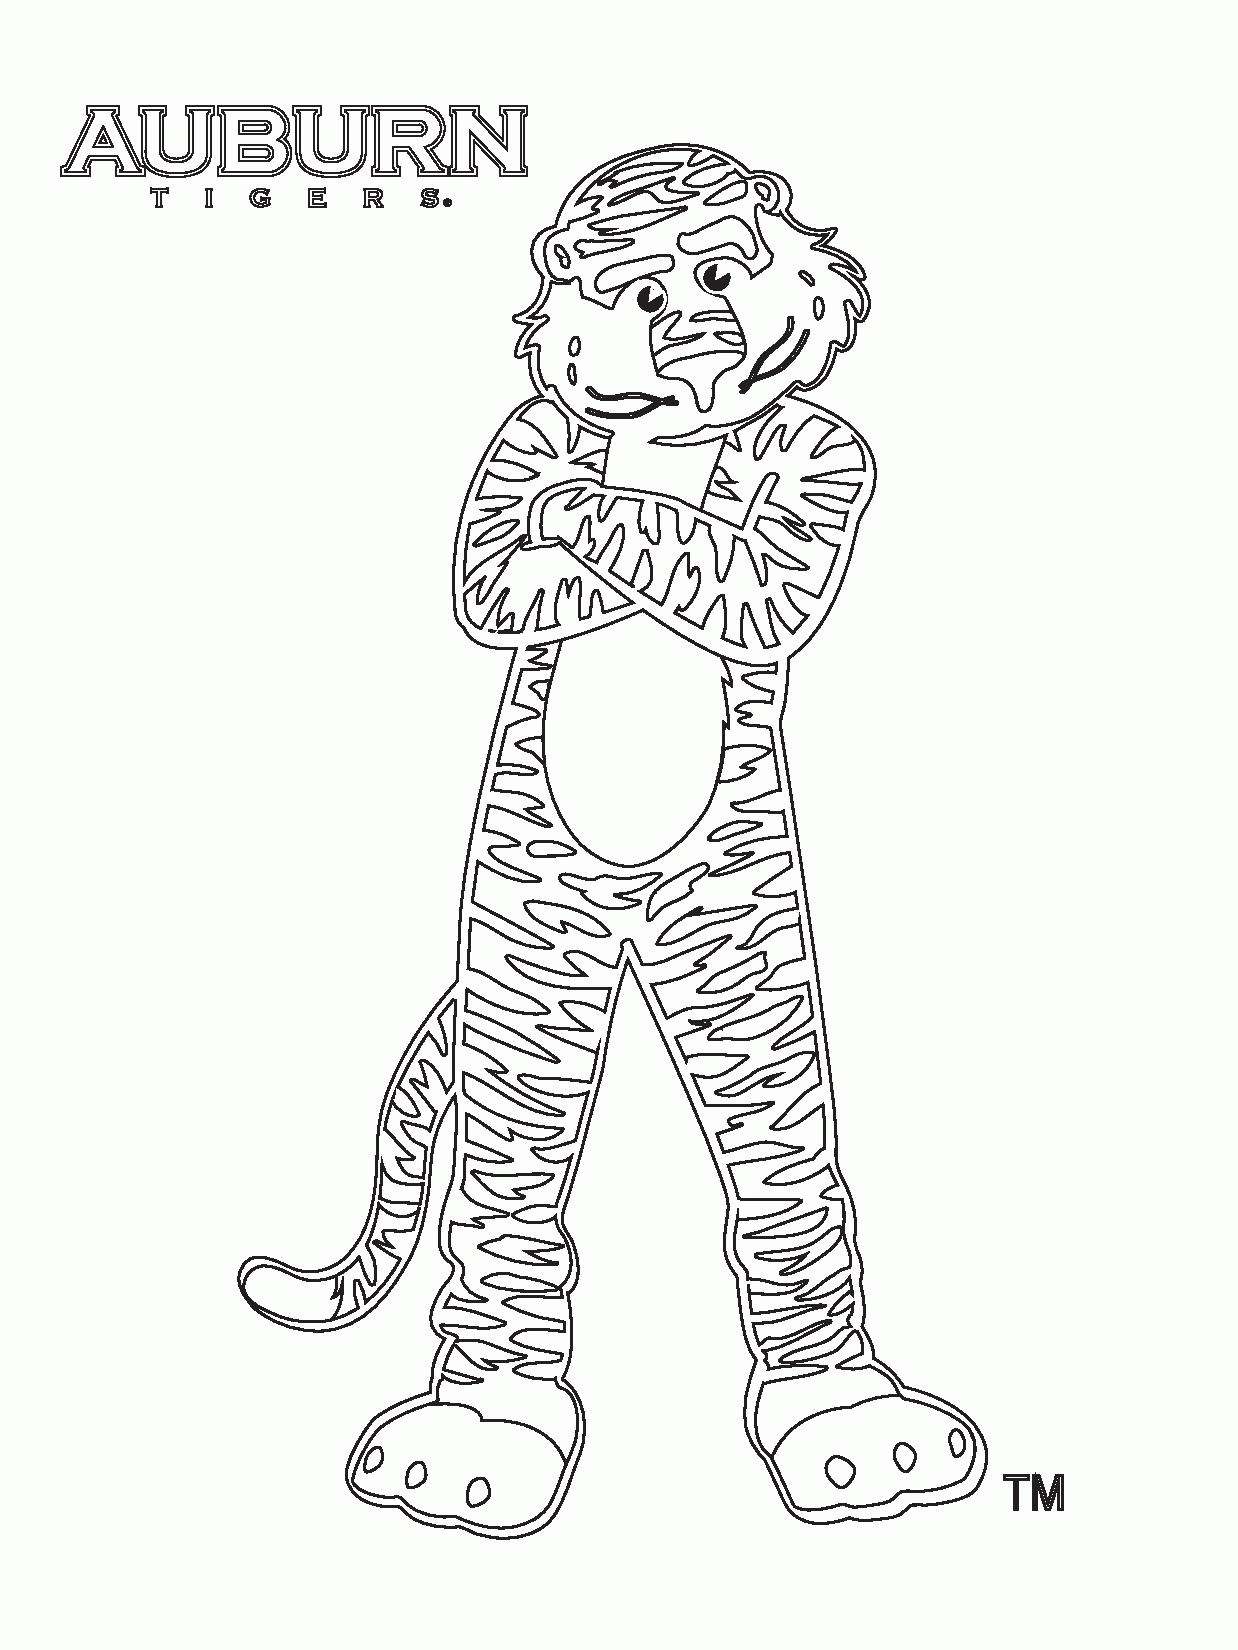 Auburn Coloring Pages - Coloring Home